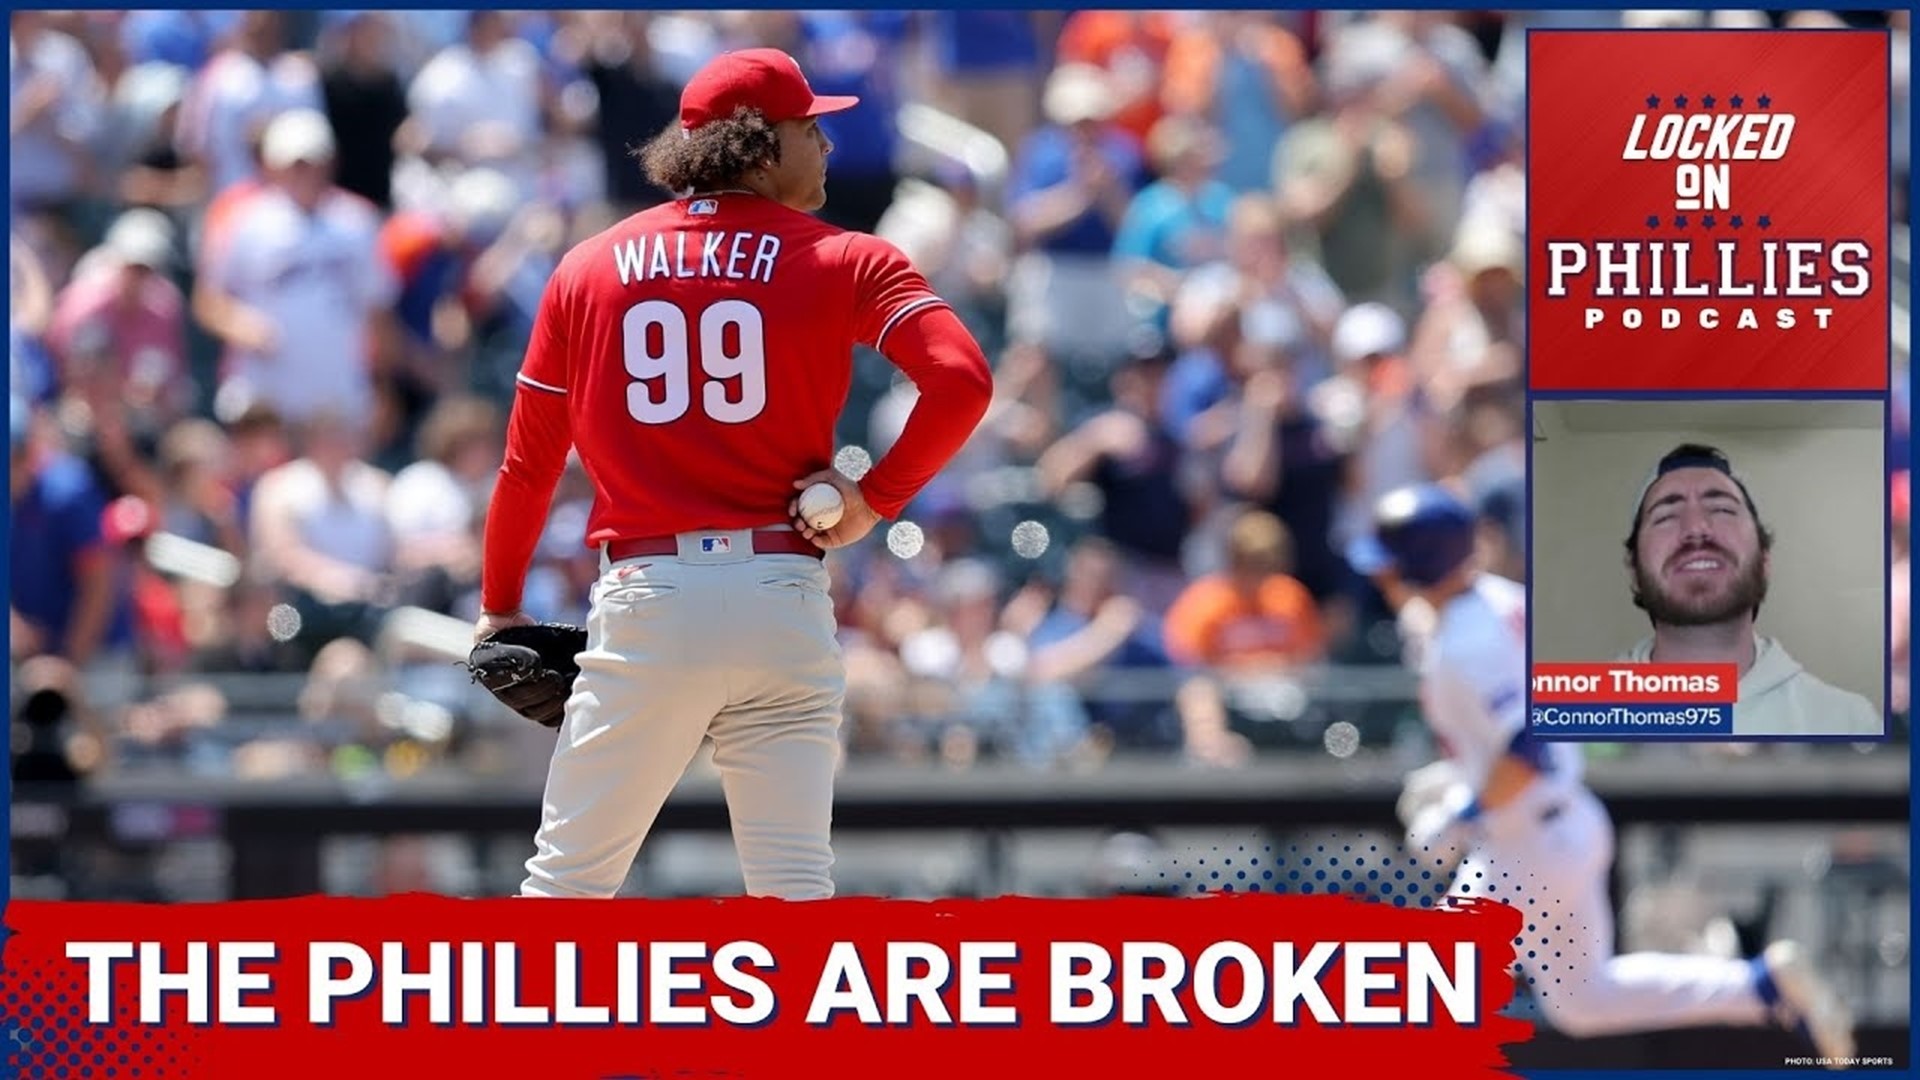 In today's episode, Connor is absolutely broken as he reacts to the Philadelphia Phillies 4 game losing streak, including the most recent 3 losses.